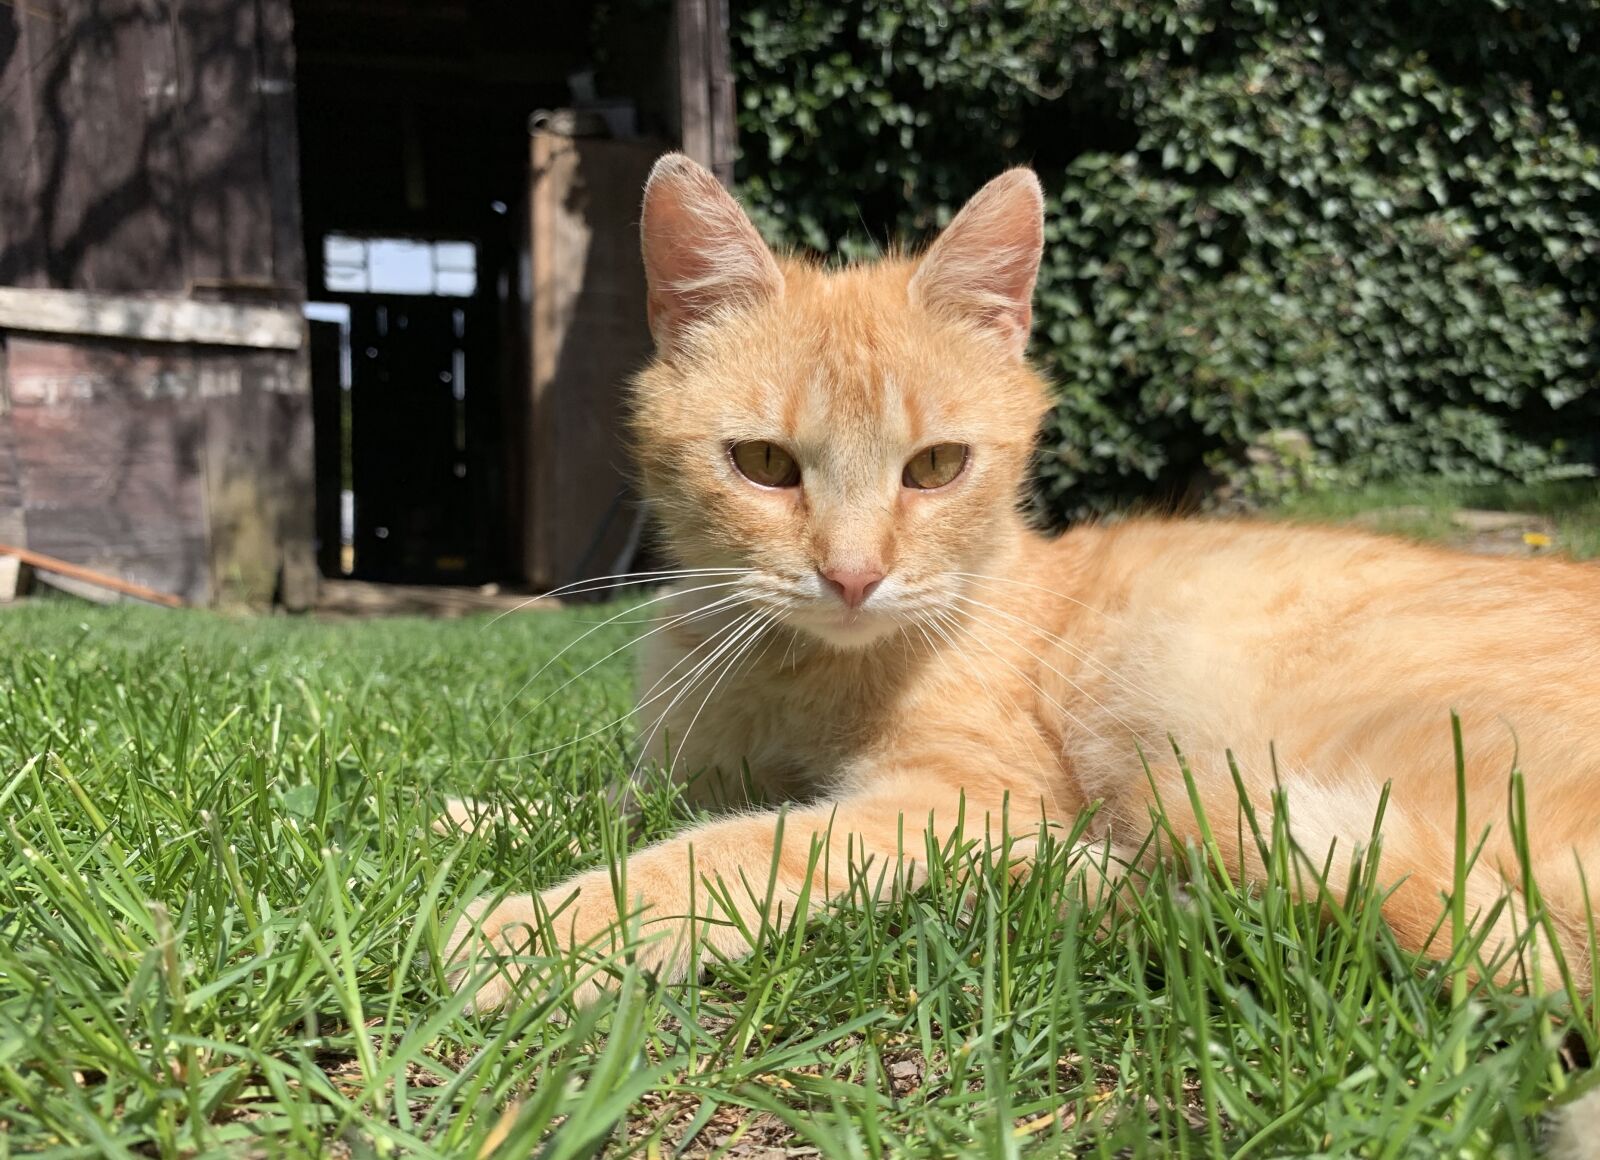 Apple iPhone XR sample photo. Cat, kitten, countryside photography